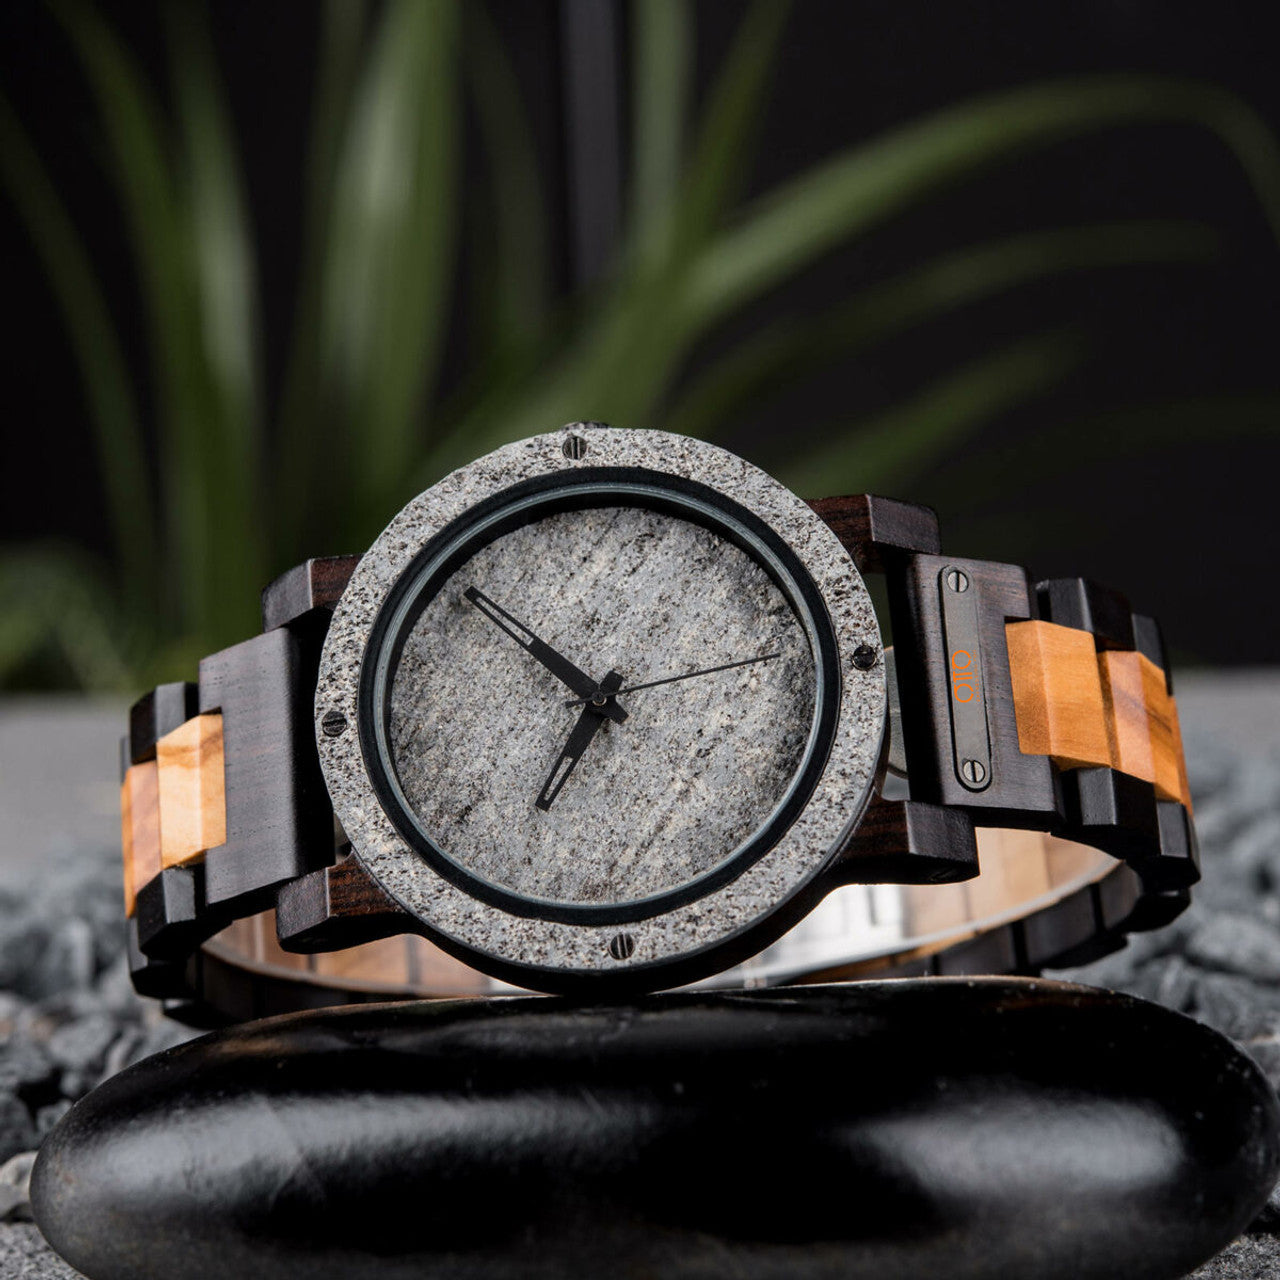 OTTO Wood Watch - Natural Rock Maple Wooden Watch – Neptune